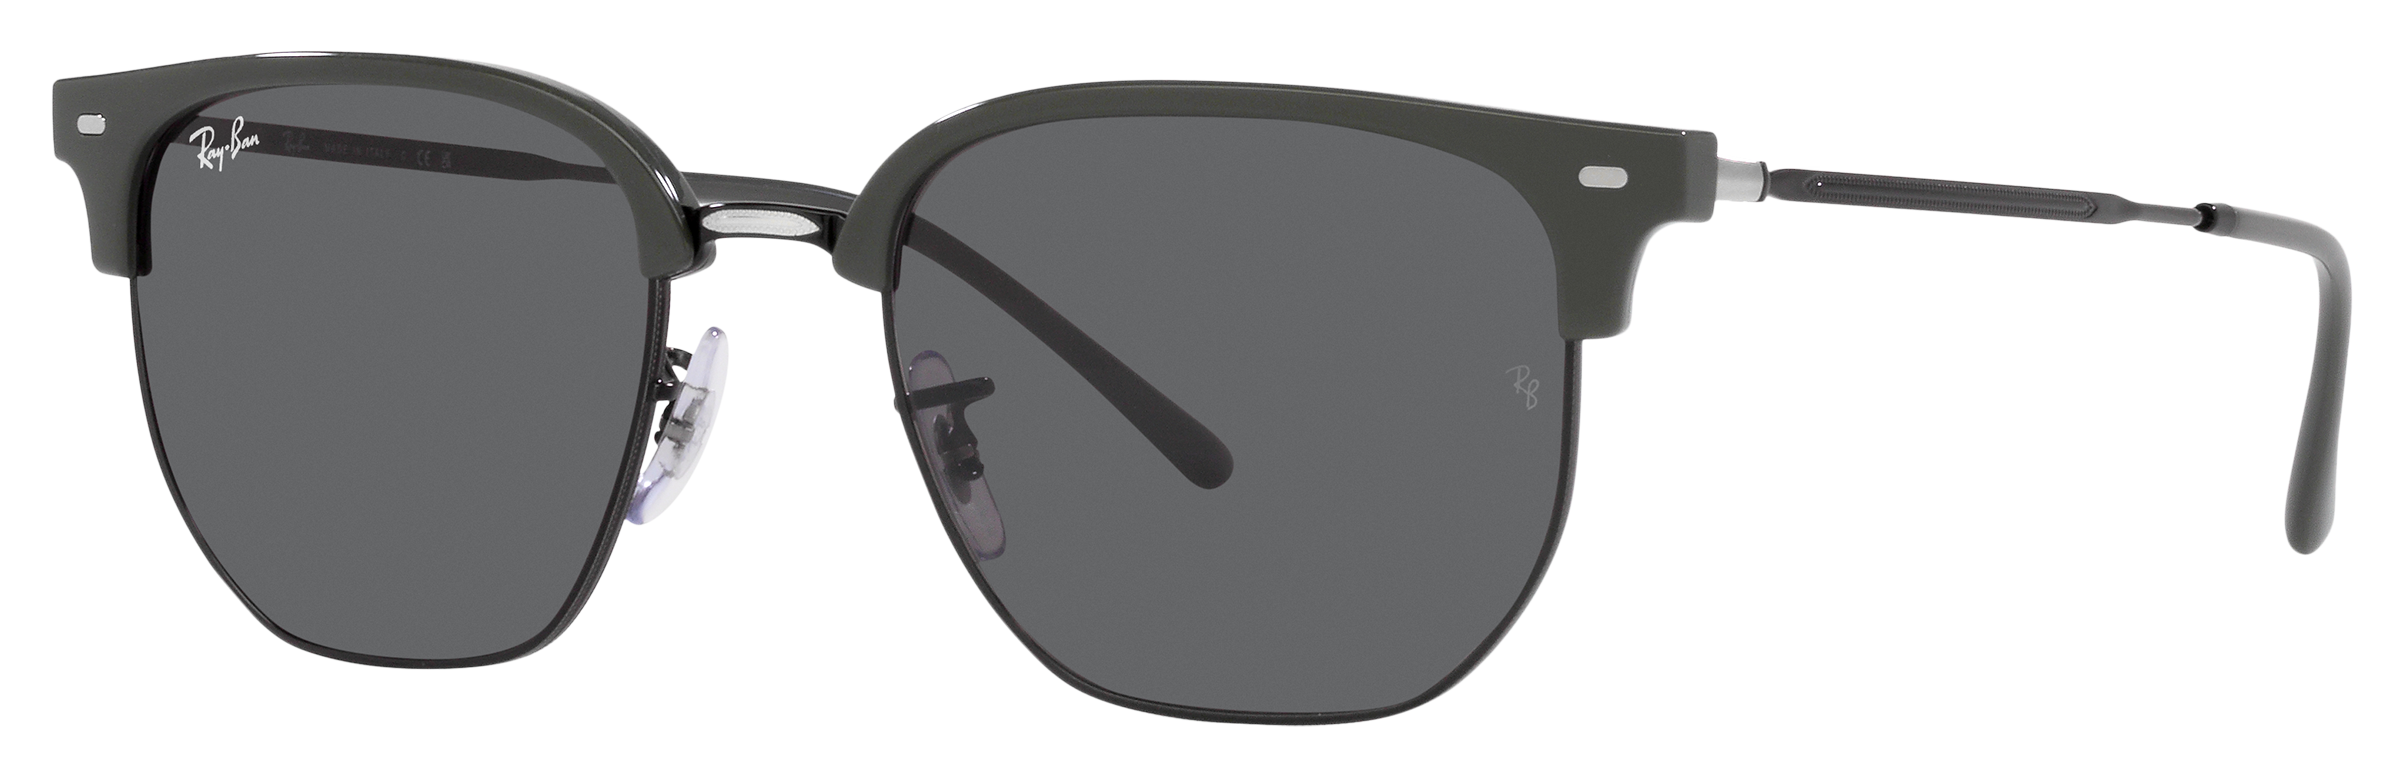 Ray-Ban New Clubmaster RB4416 Glass Sunglasses | Bass Pro Shops